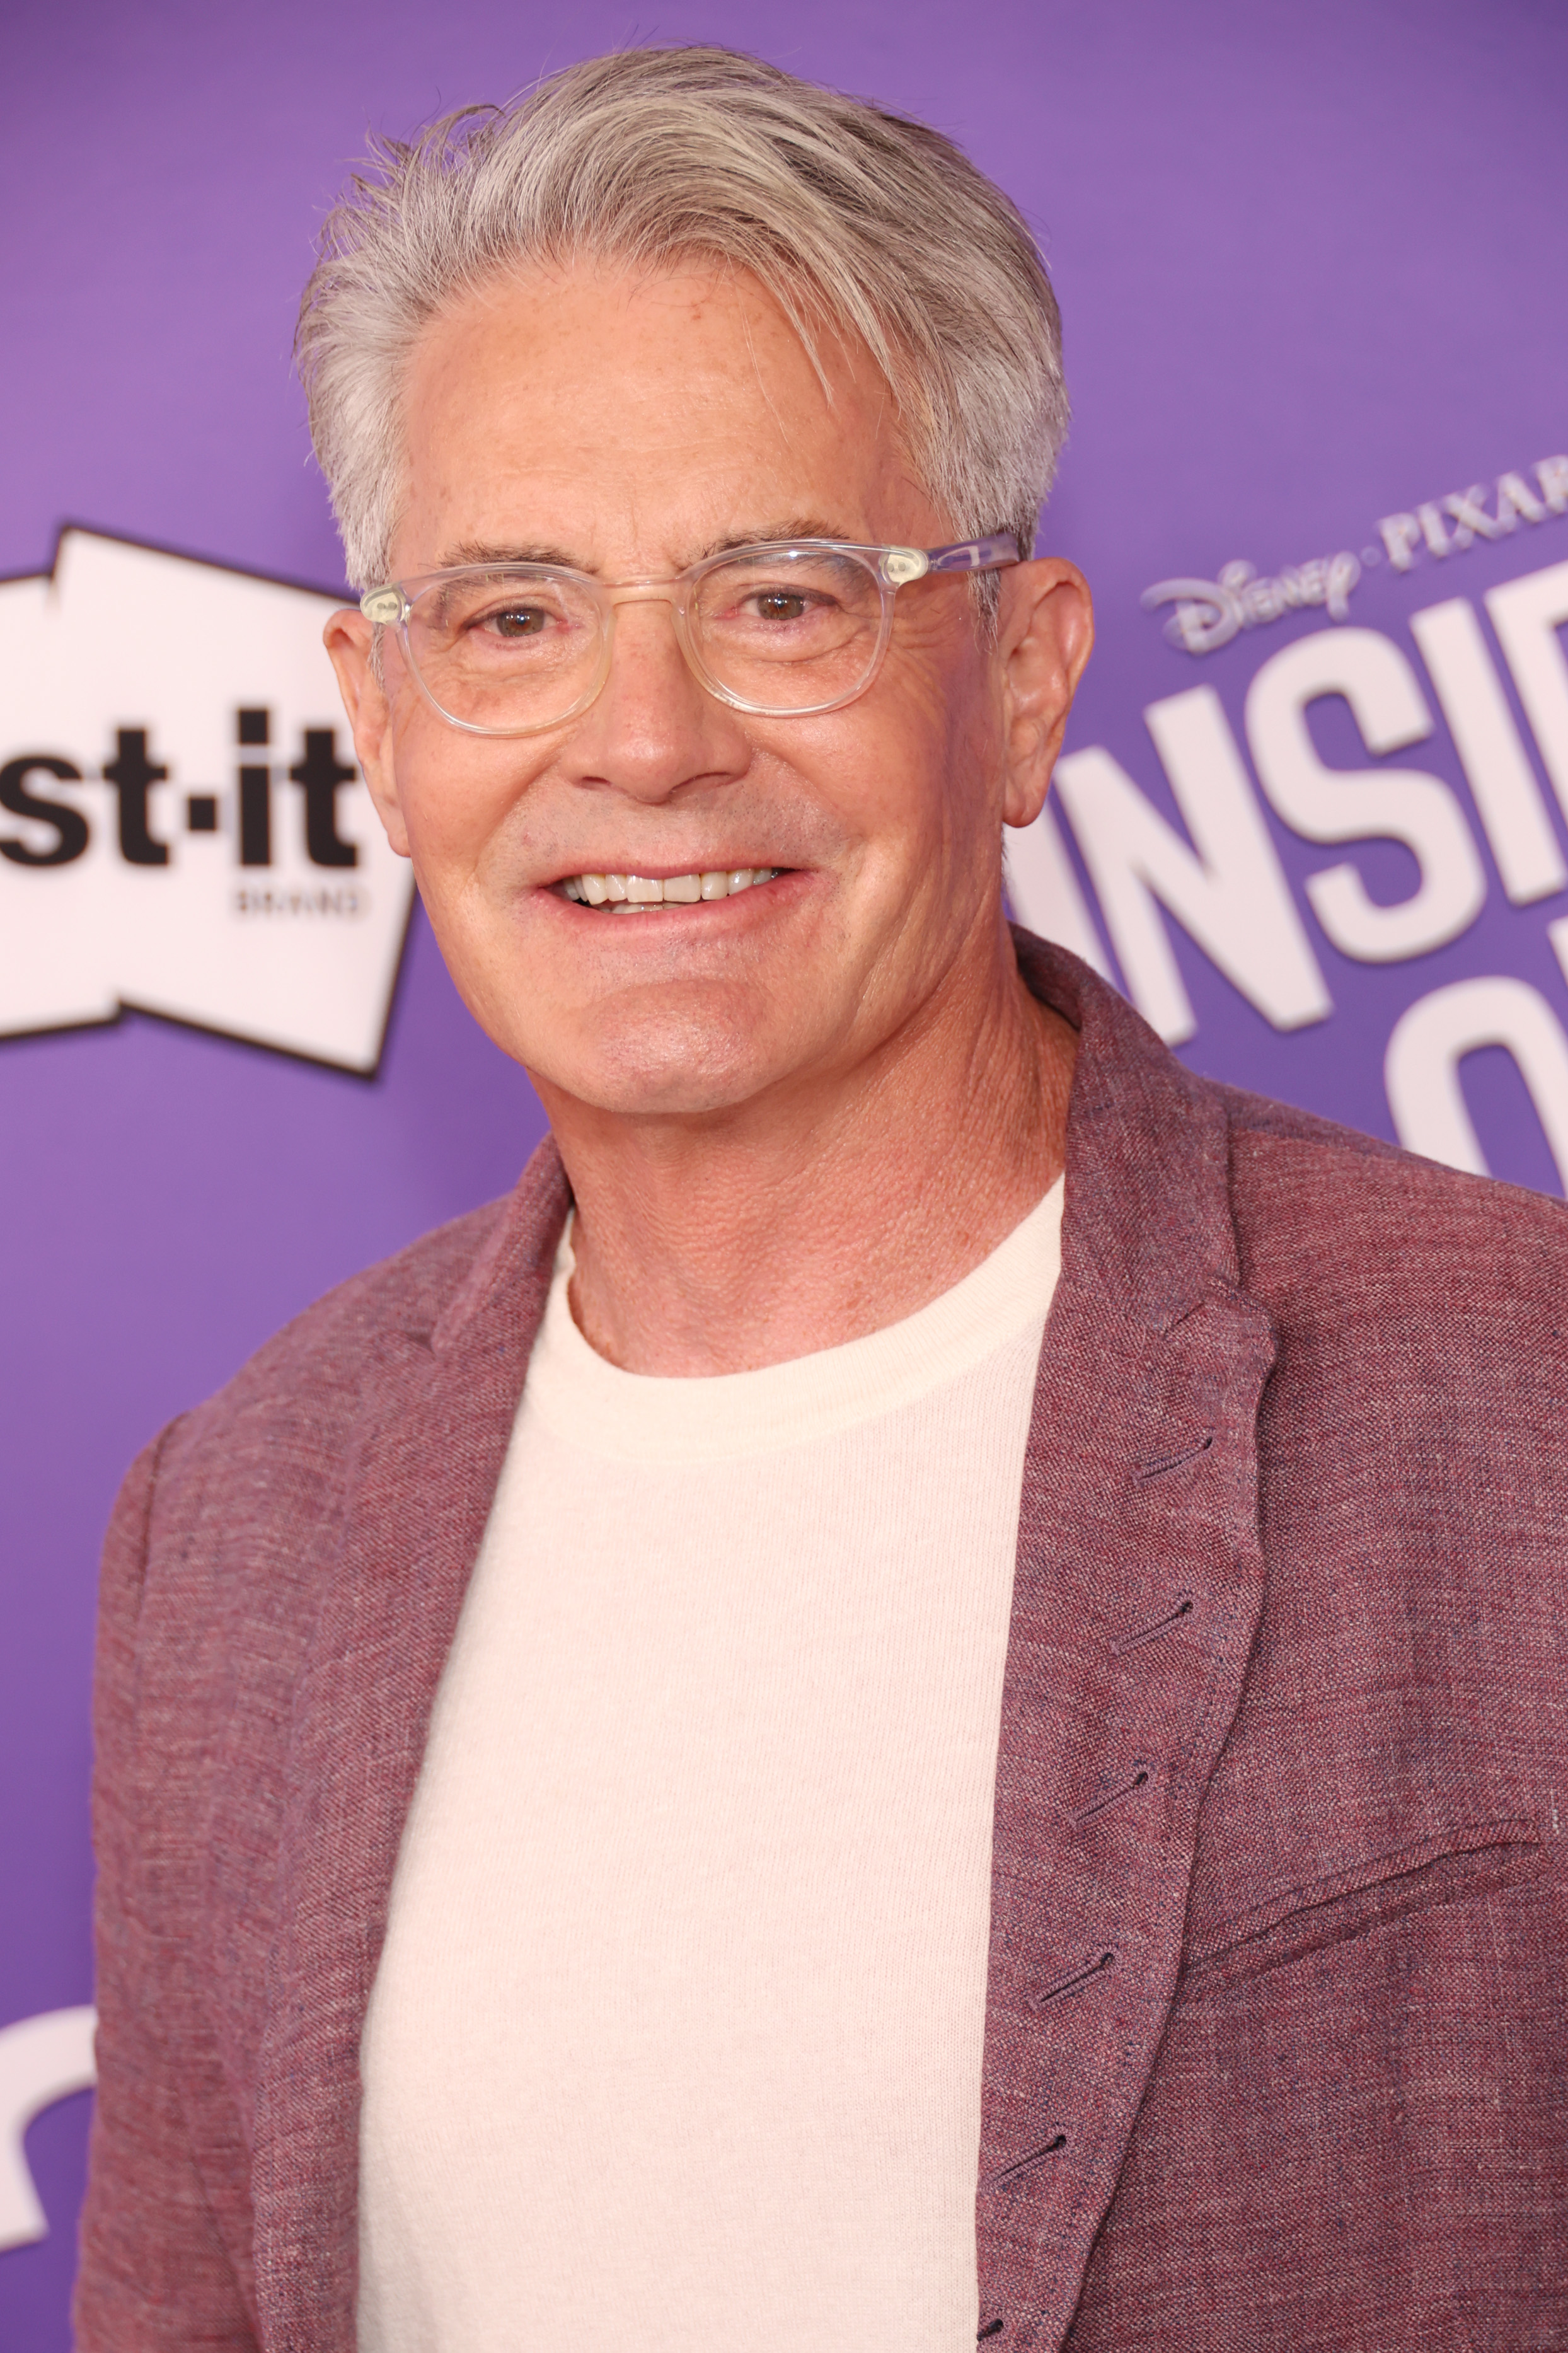 Kyle MacLachlan at the world premiere of "Inside Out 2" on June 10, 2024, in Hollywood, California. | Source: Getty Images